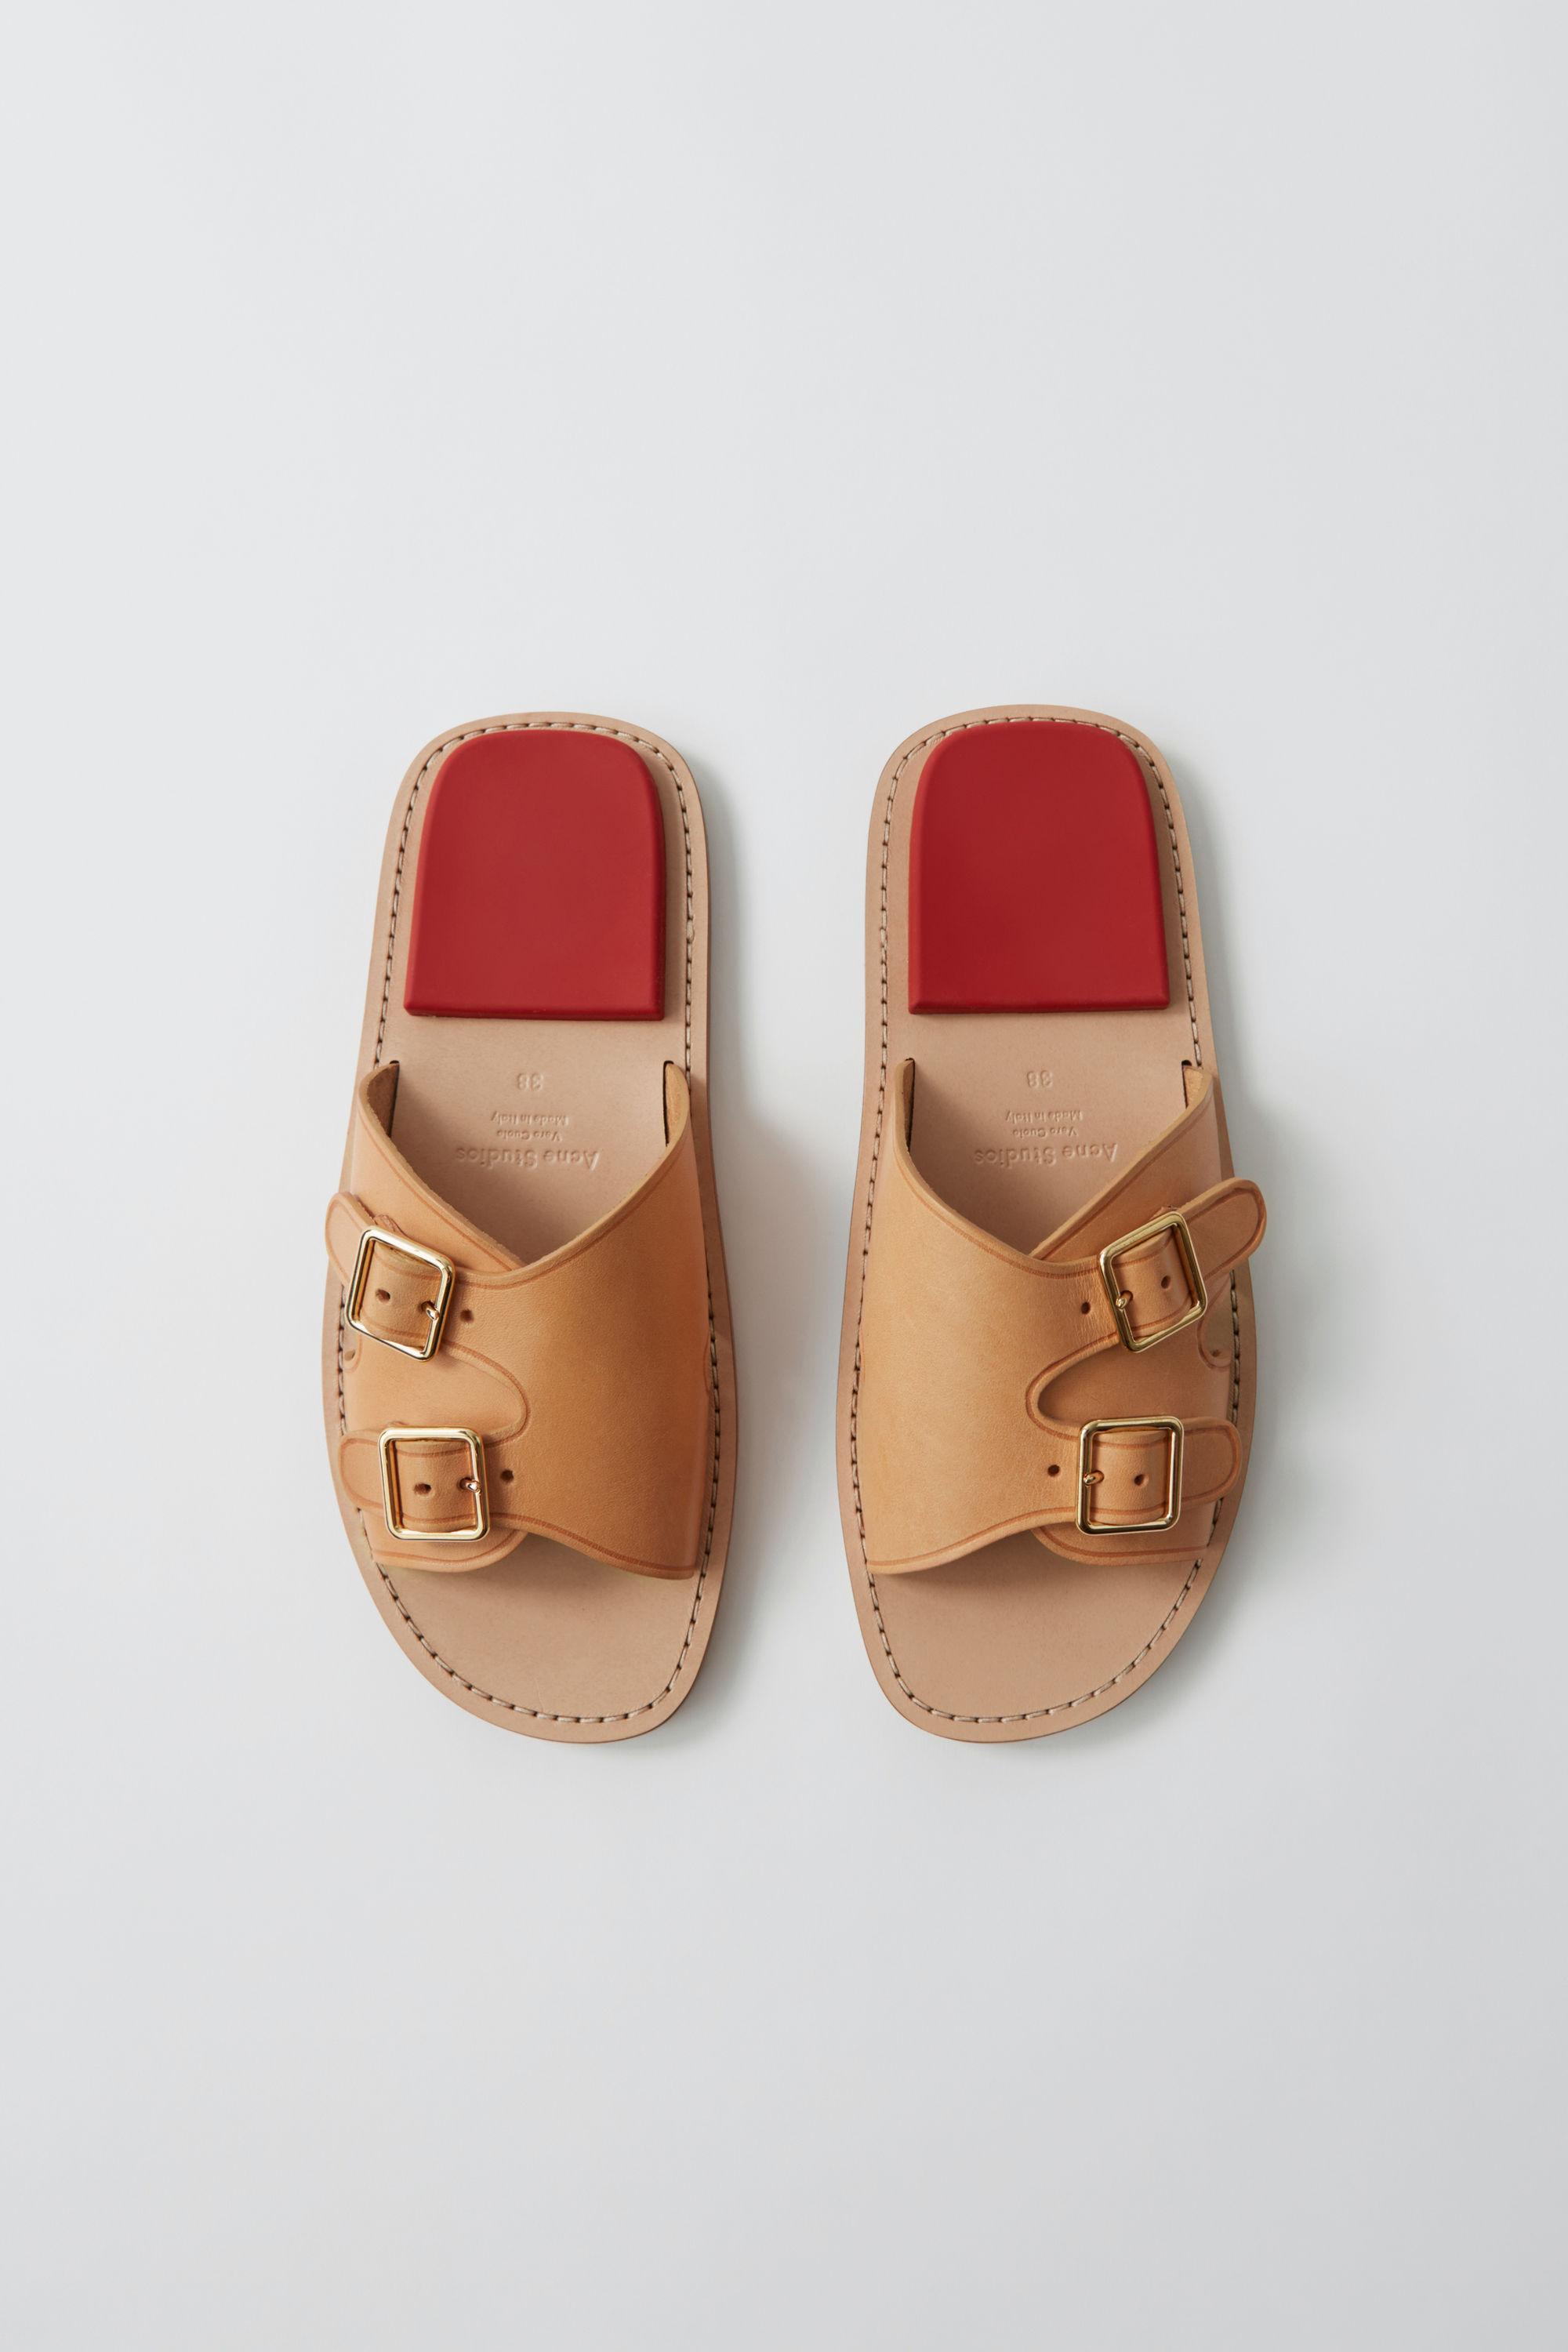 fly sandals canada